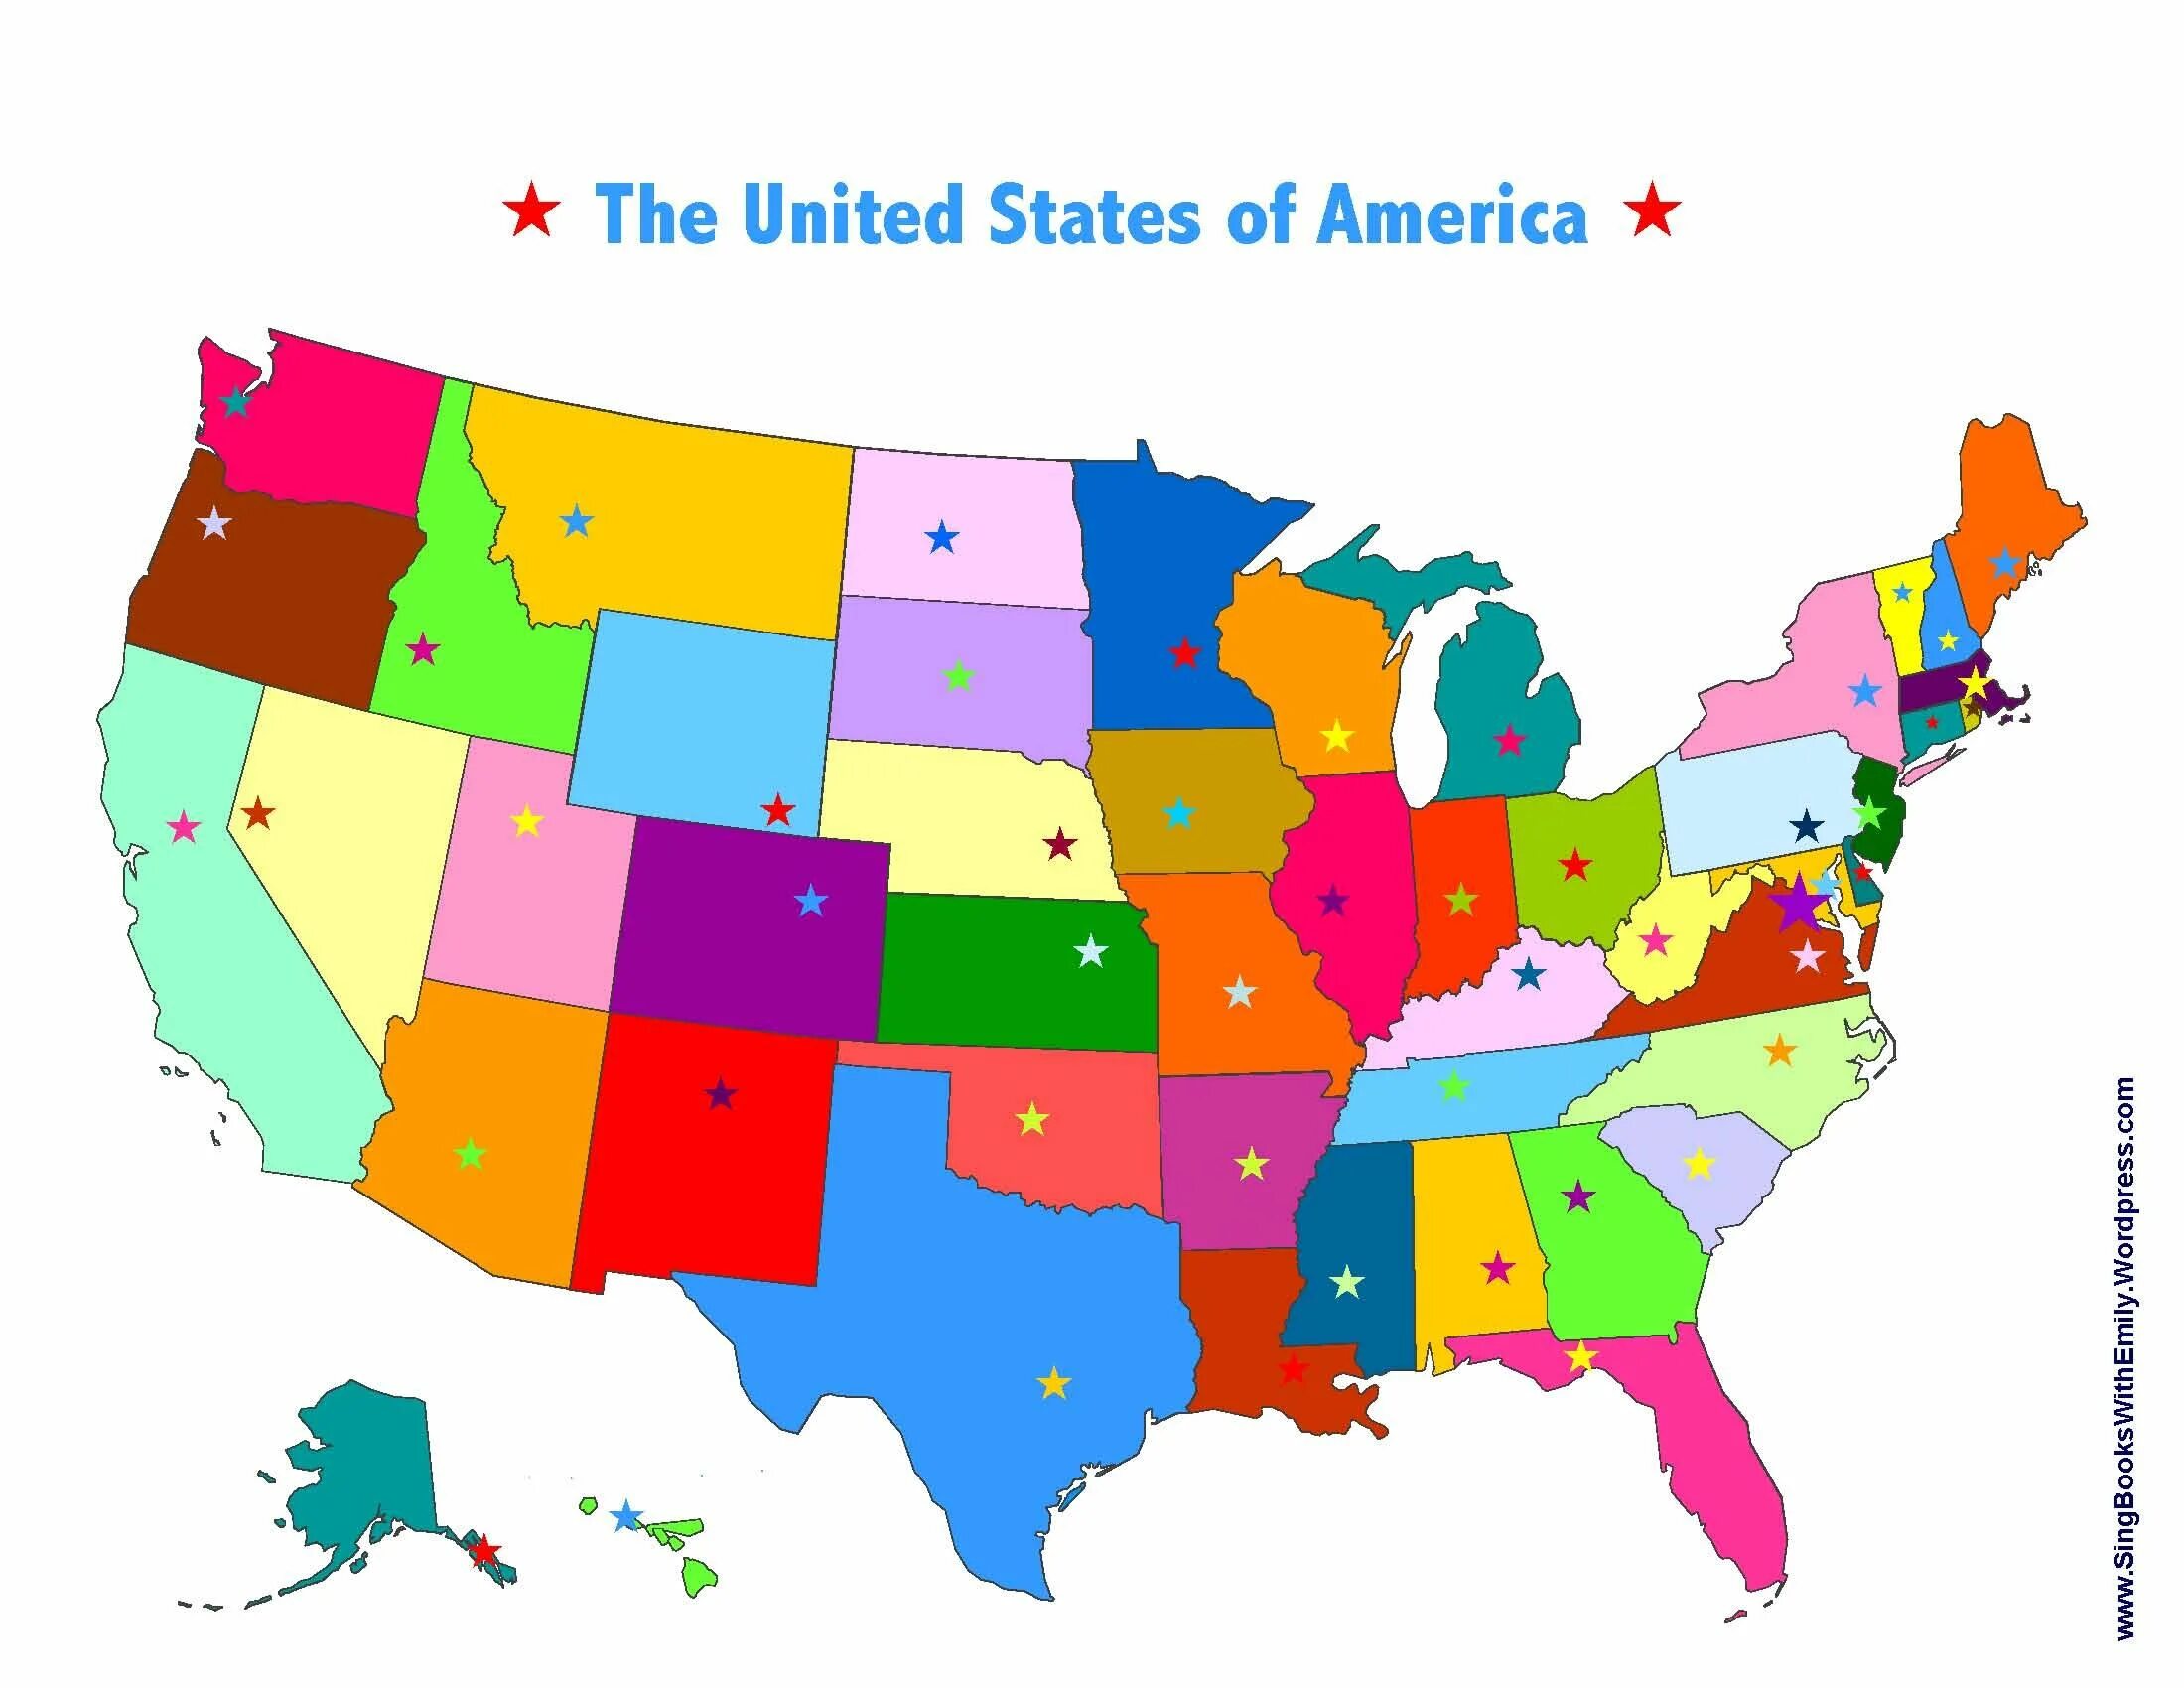 The United States of America карта. USA States Map. USA 50 States. USA States and Capitals Map. He states that